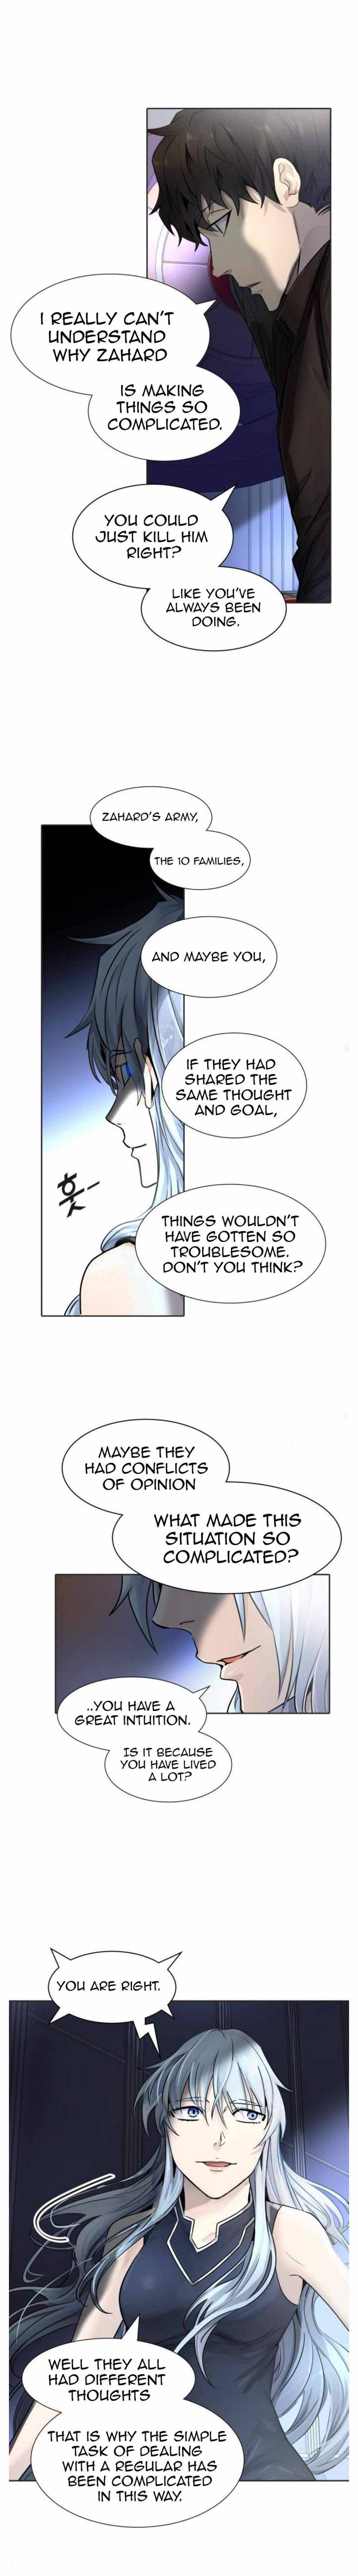 Tower Of God 502 15